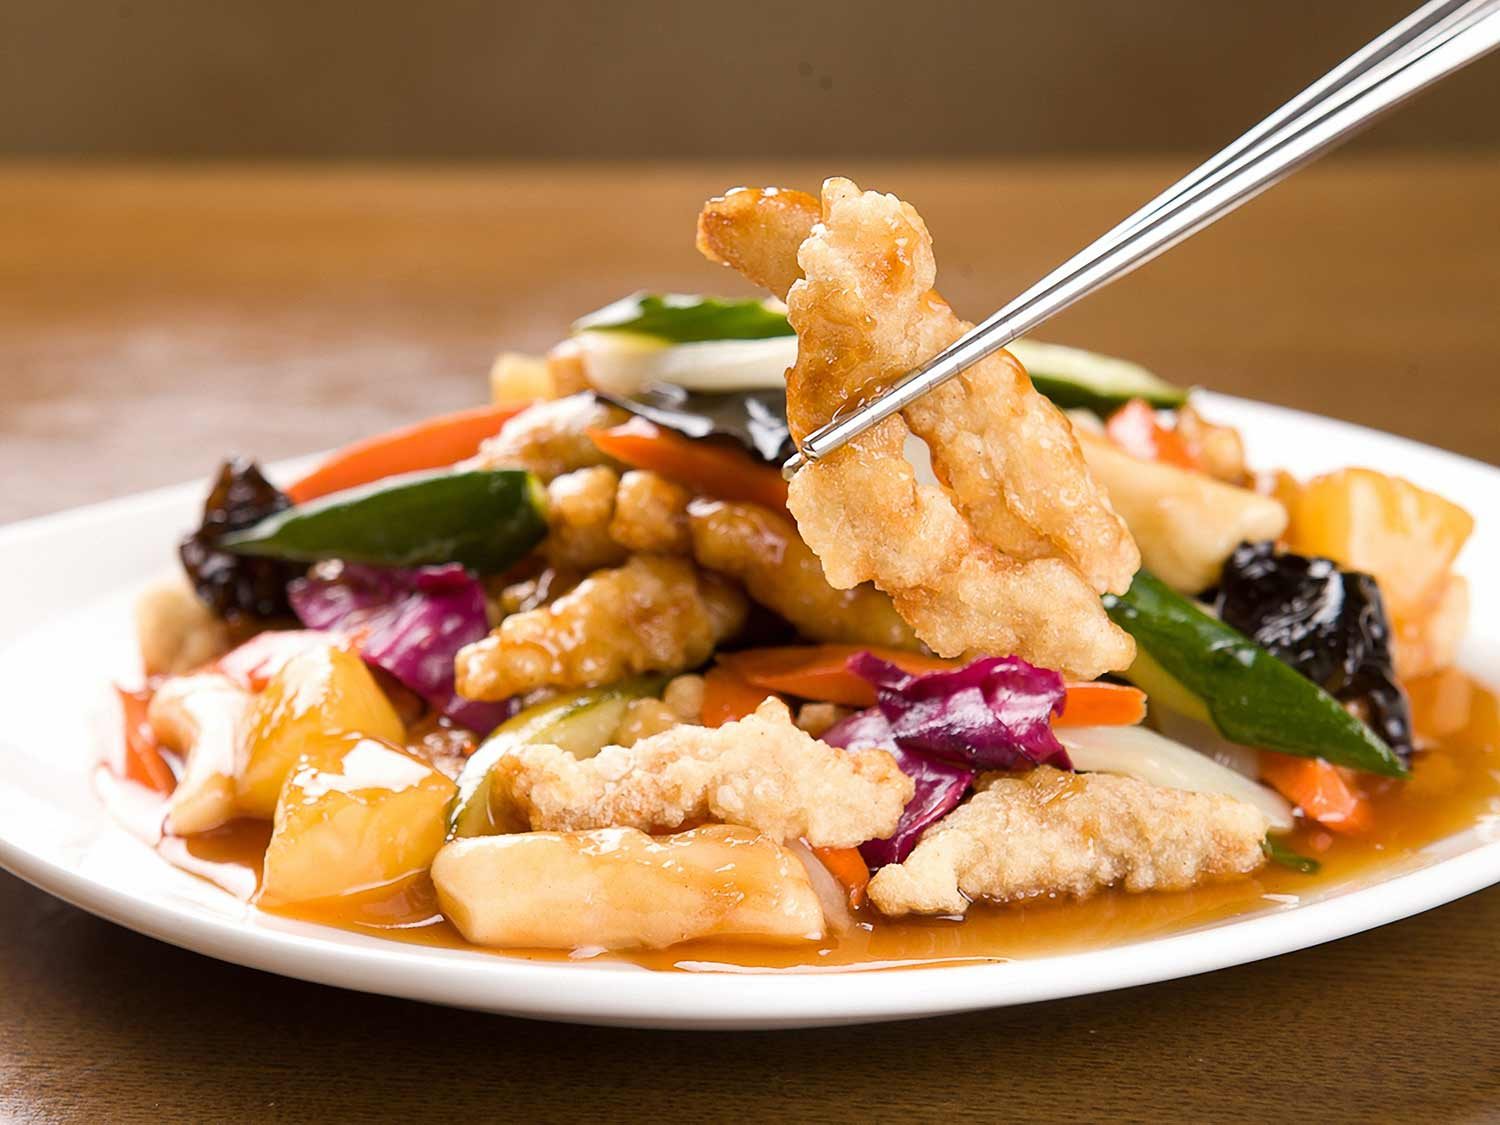 A plate of tangsuyuk (Chinese-Korean sweet-and-sour pork) with vegetables